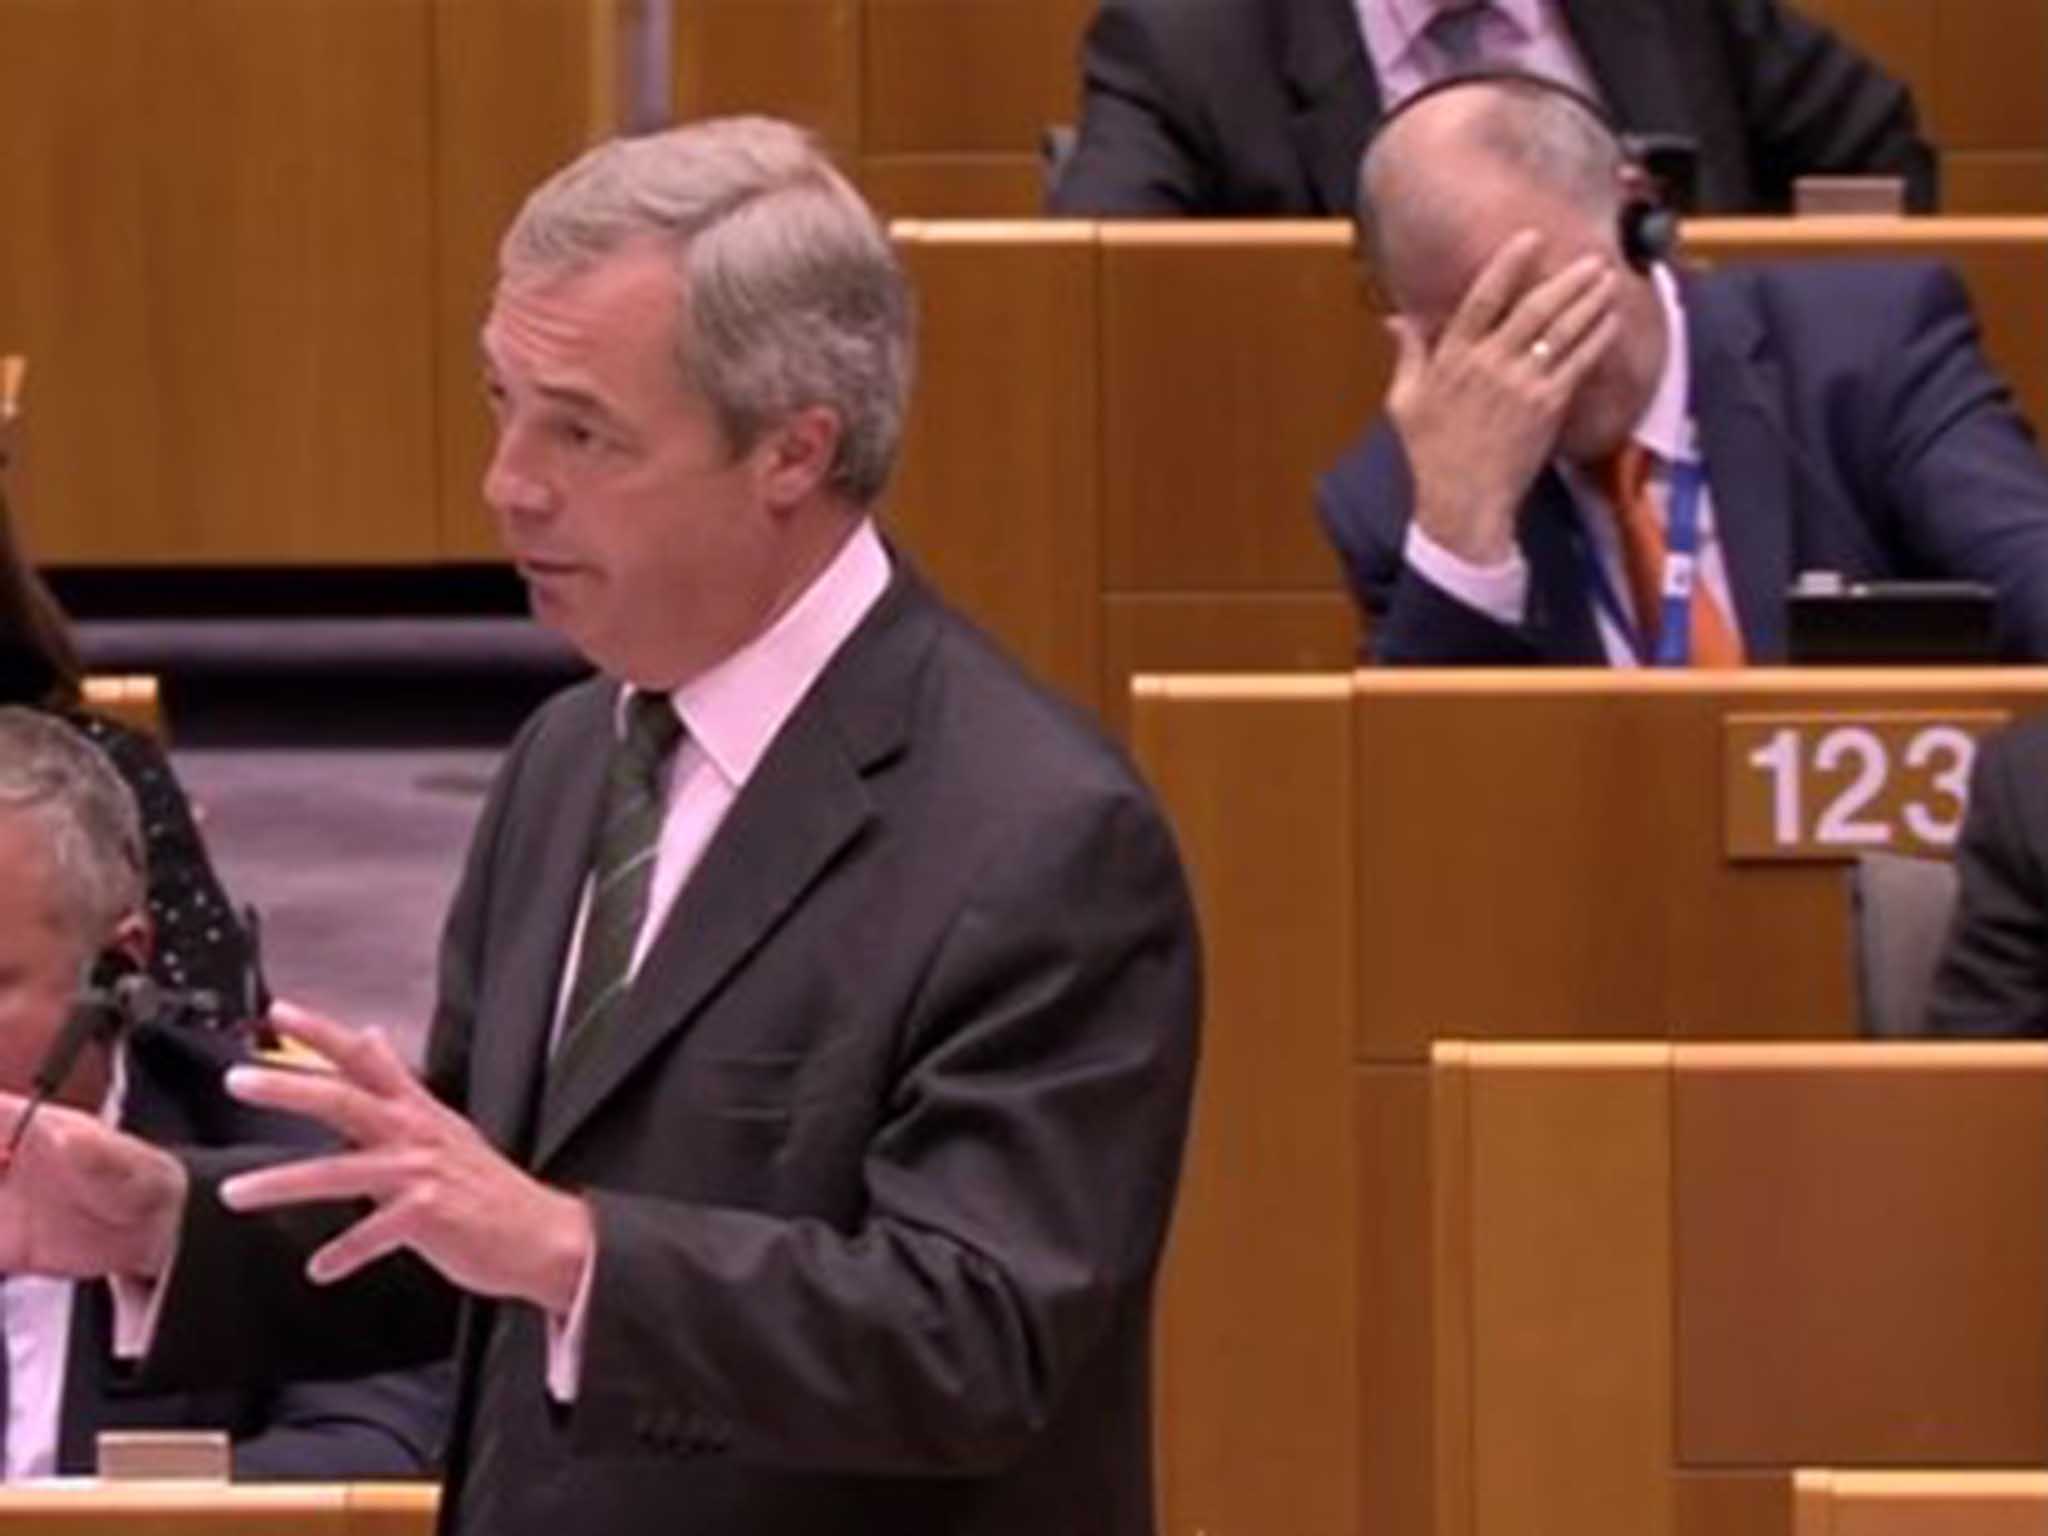 Vytenis Andriukaitis puts his head in his hands as Nigel Farage talks